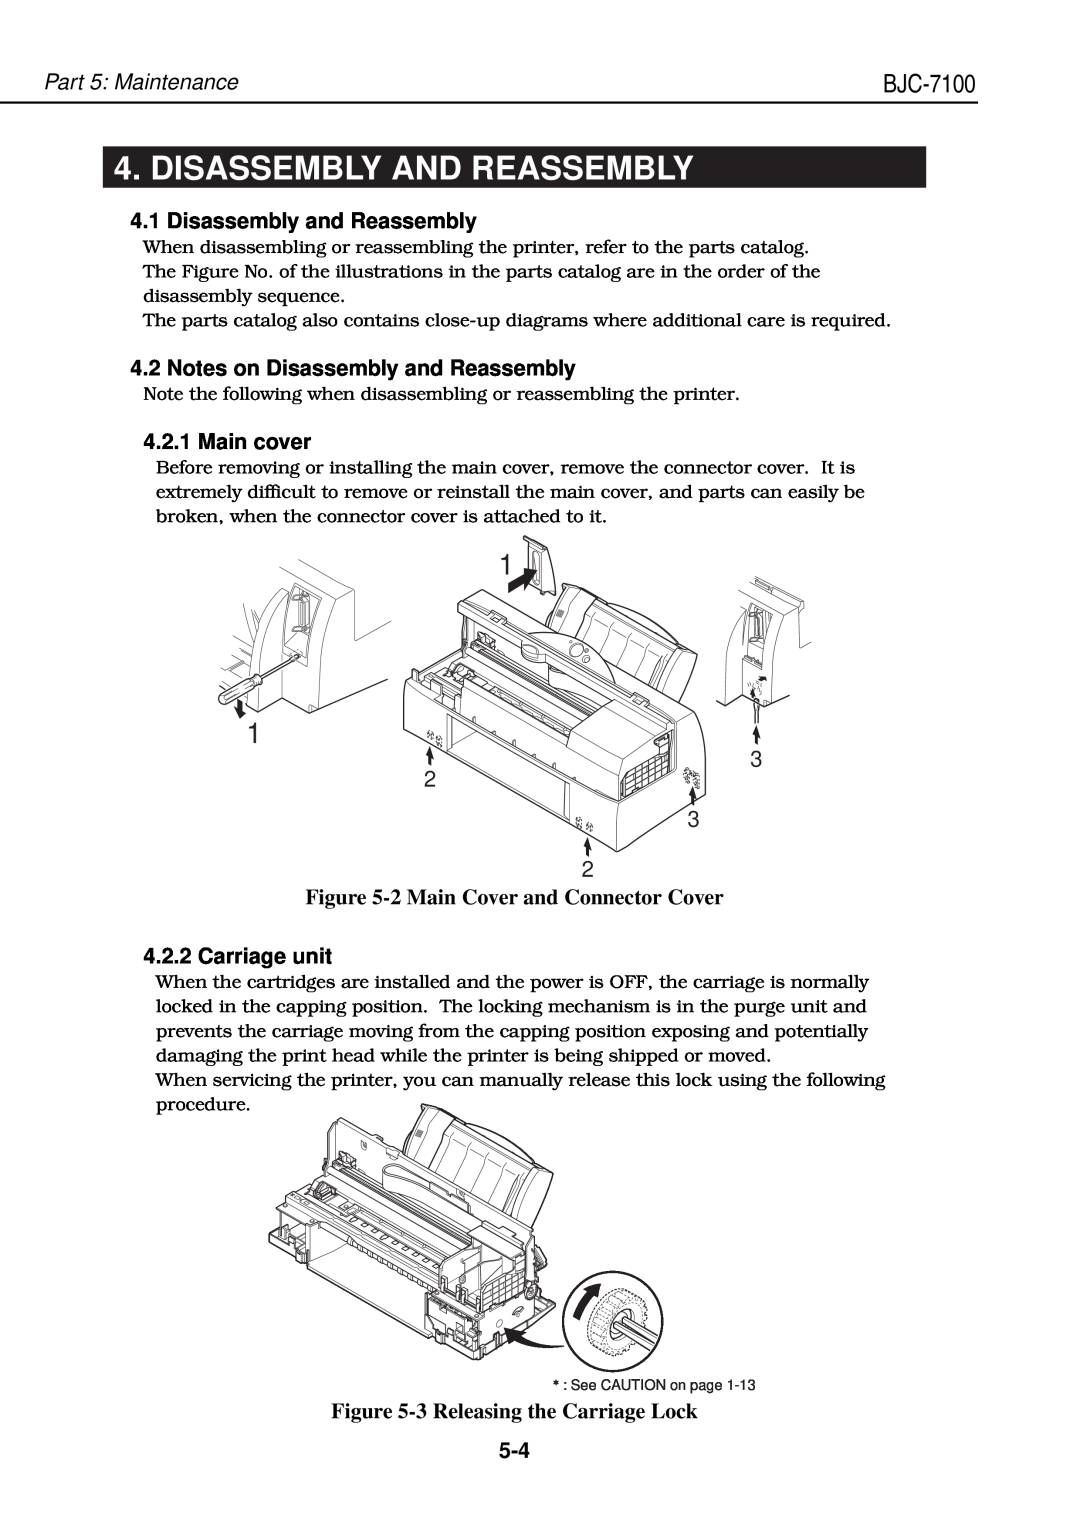 Canon QY8-1360-000 manual Disassembly And Reassembly, Notes on Disassembly and Reassembly, Main cover, Carriage unit 